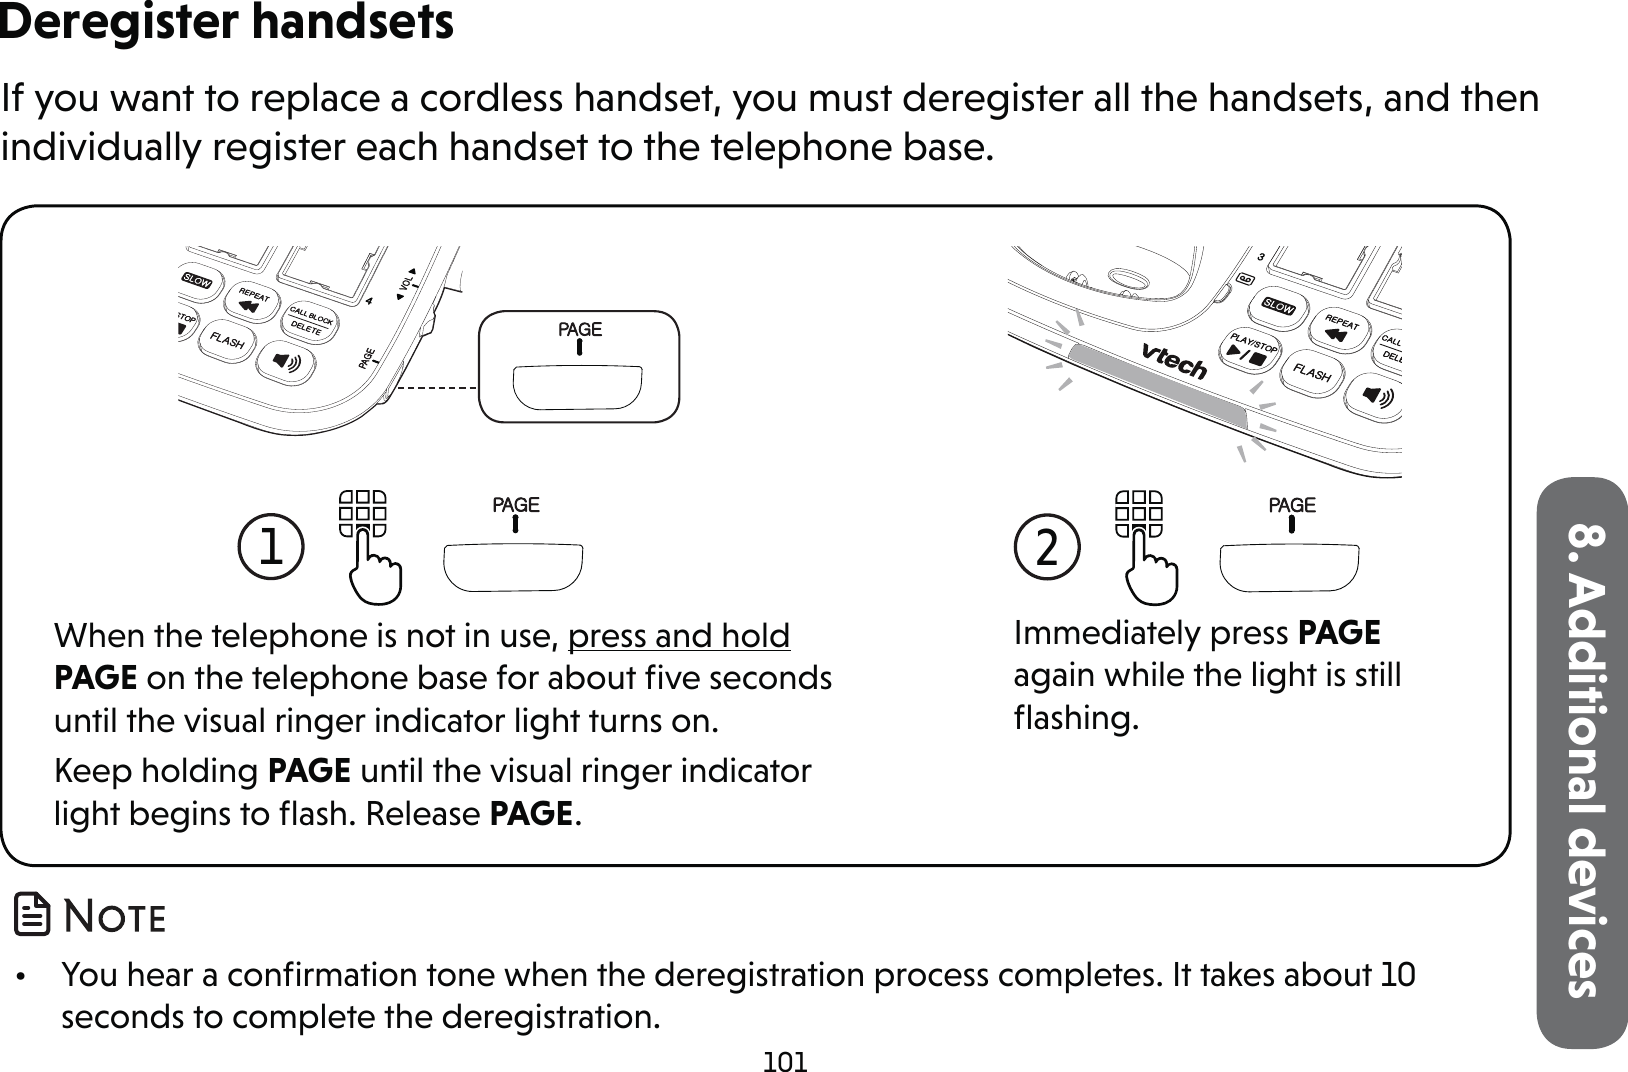 1018. Additional devicesDeregister handsetsIf you want to replace a cordless handset, you must deregister all the handsets, and then individually register each handset to the telephone base. •  You hear a conﬁrmation tone when the deregistration process completes. It takes about 10 seconds to complete the deregistration.1  When the telephone is not in use, press and hold PAGE on the telephone base for about ﬁve seconds until the visual ringer indicator light turns on.Keep holding PAGE until the visual ringer indicator light begins to ﬂash. Release PAGE.2  Immediately press PAGE again while the light is still ﬂashing.